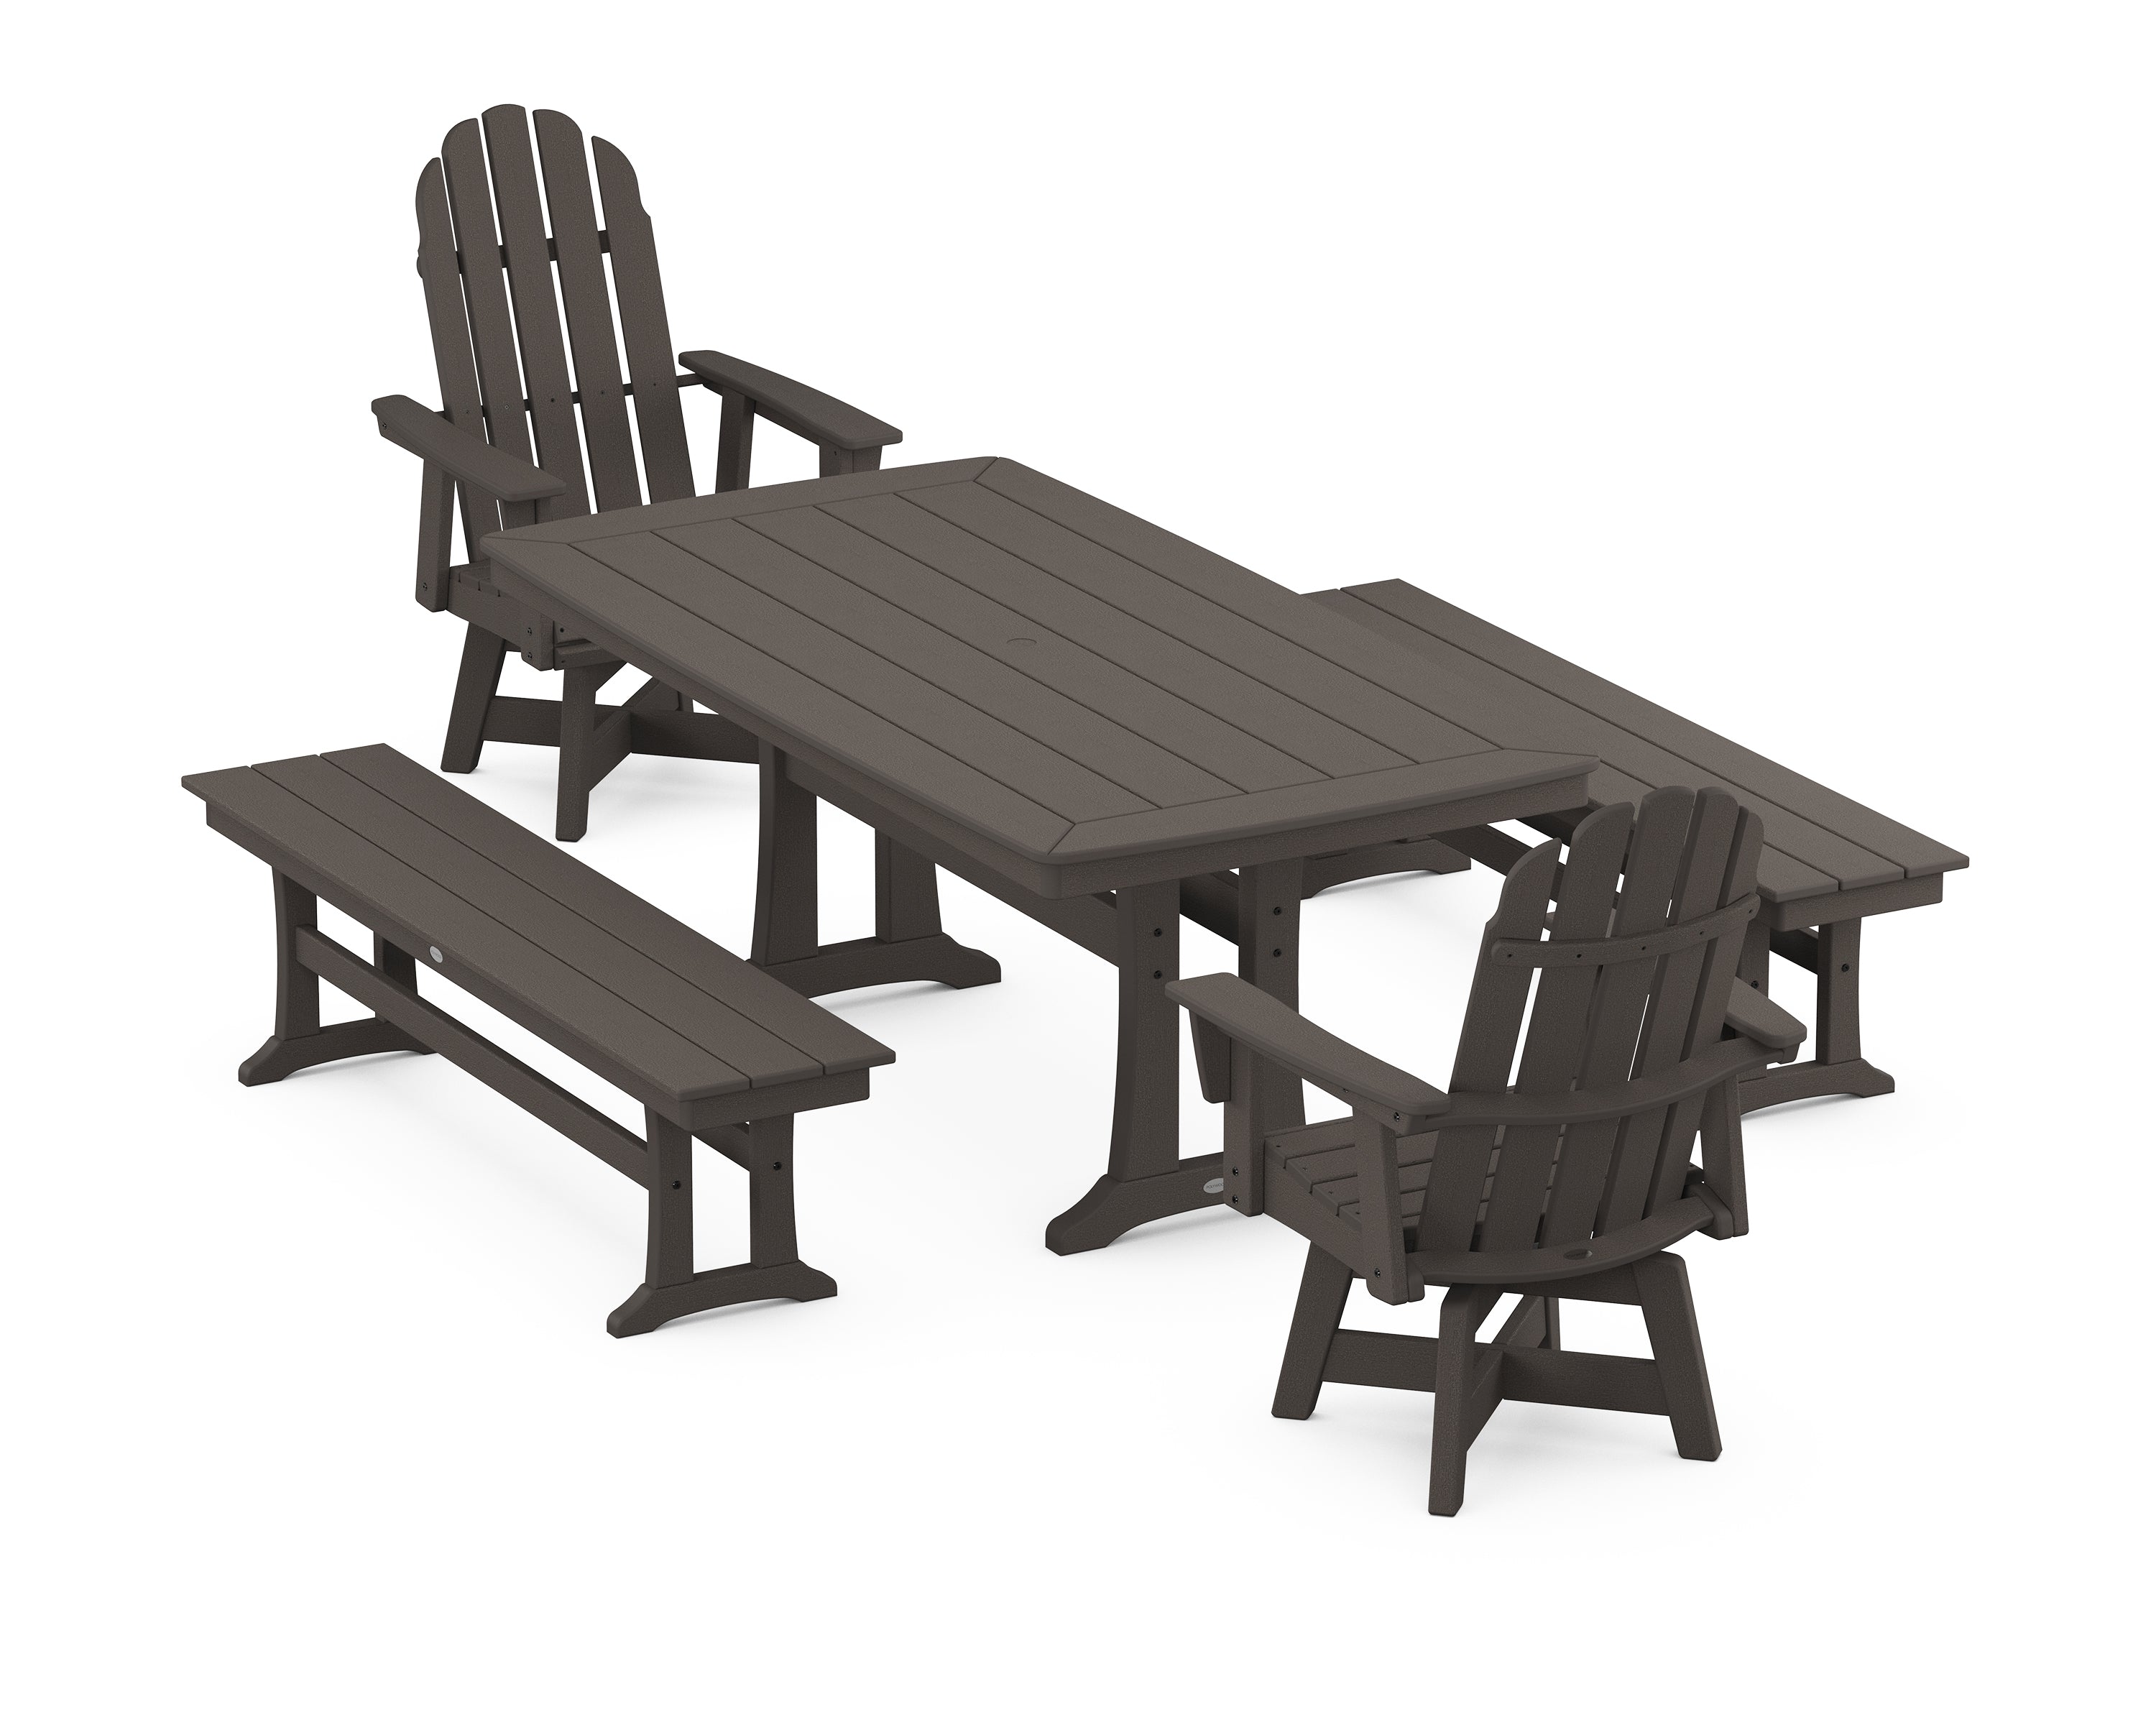 POLYWOOD® Vineyard Adirondack Swivel Chair 5-Piece Dining Set with Trestle Legs and Benches in Vintage Coffee